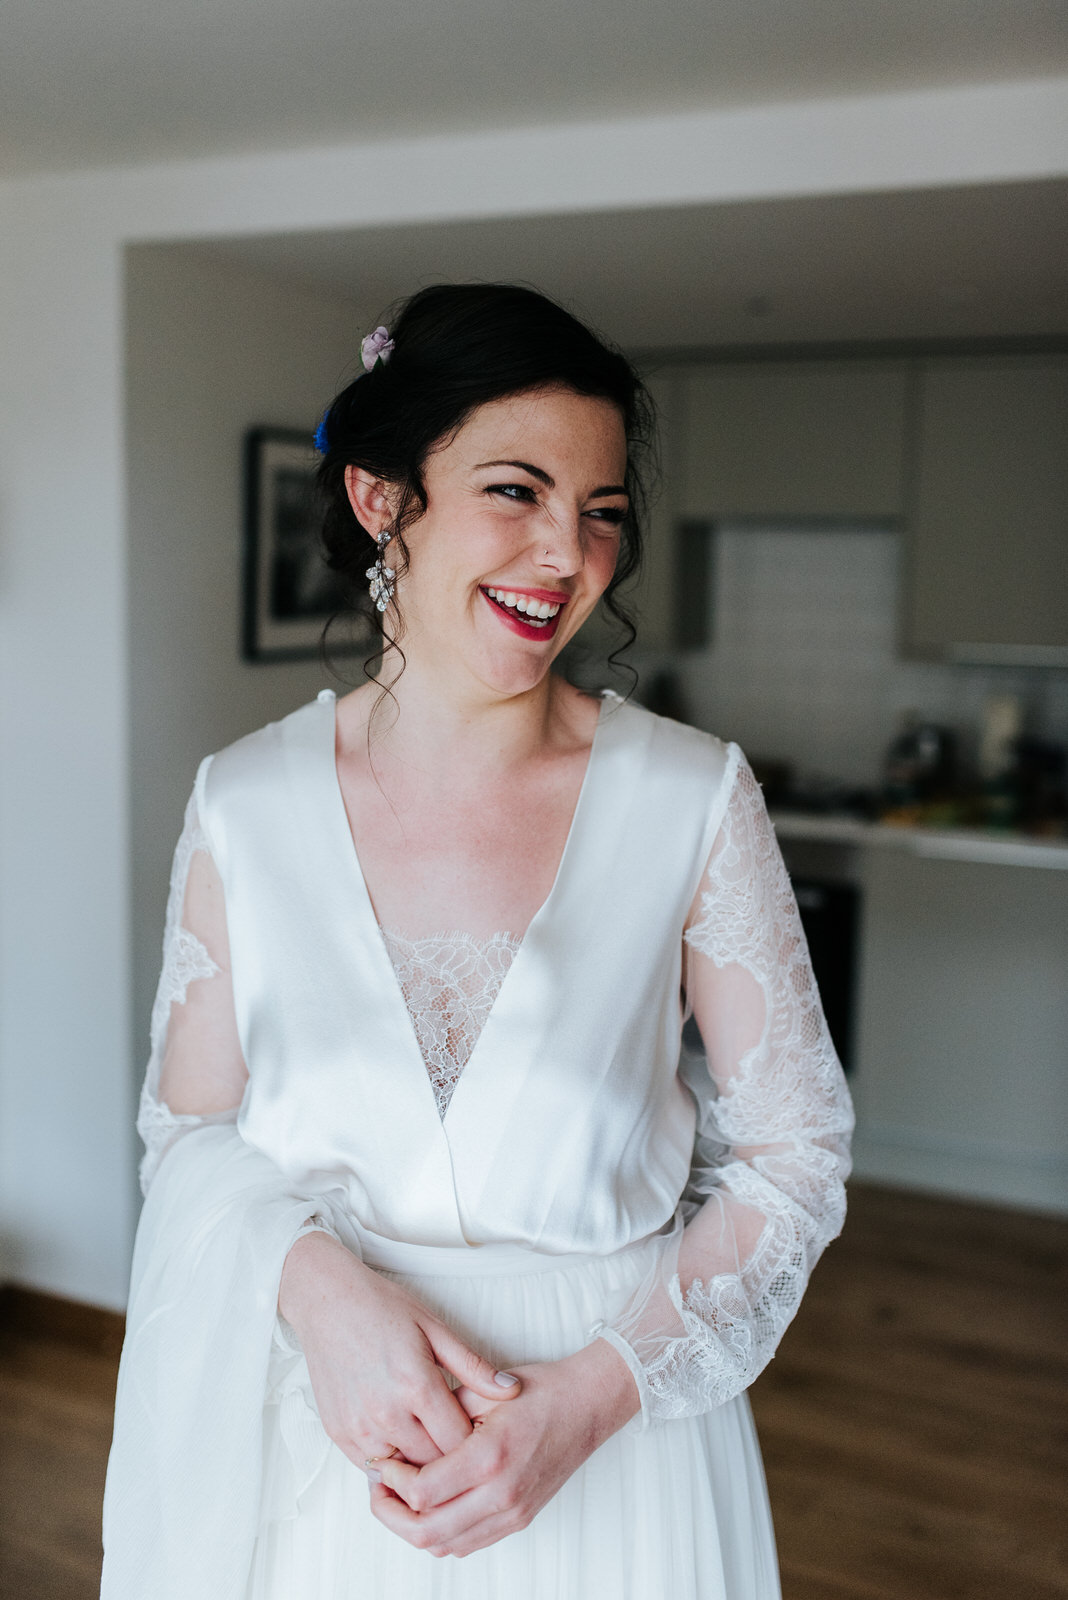 Portrait of bride smiling before she heads to the wedding ceremo